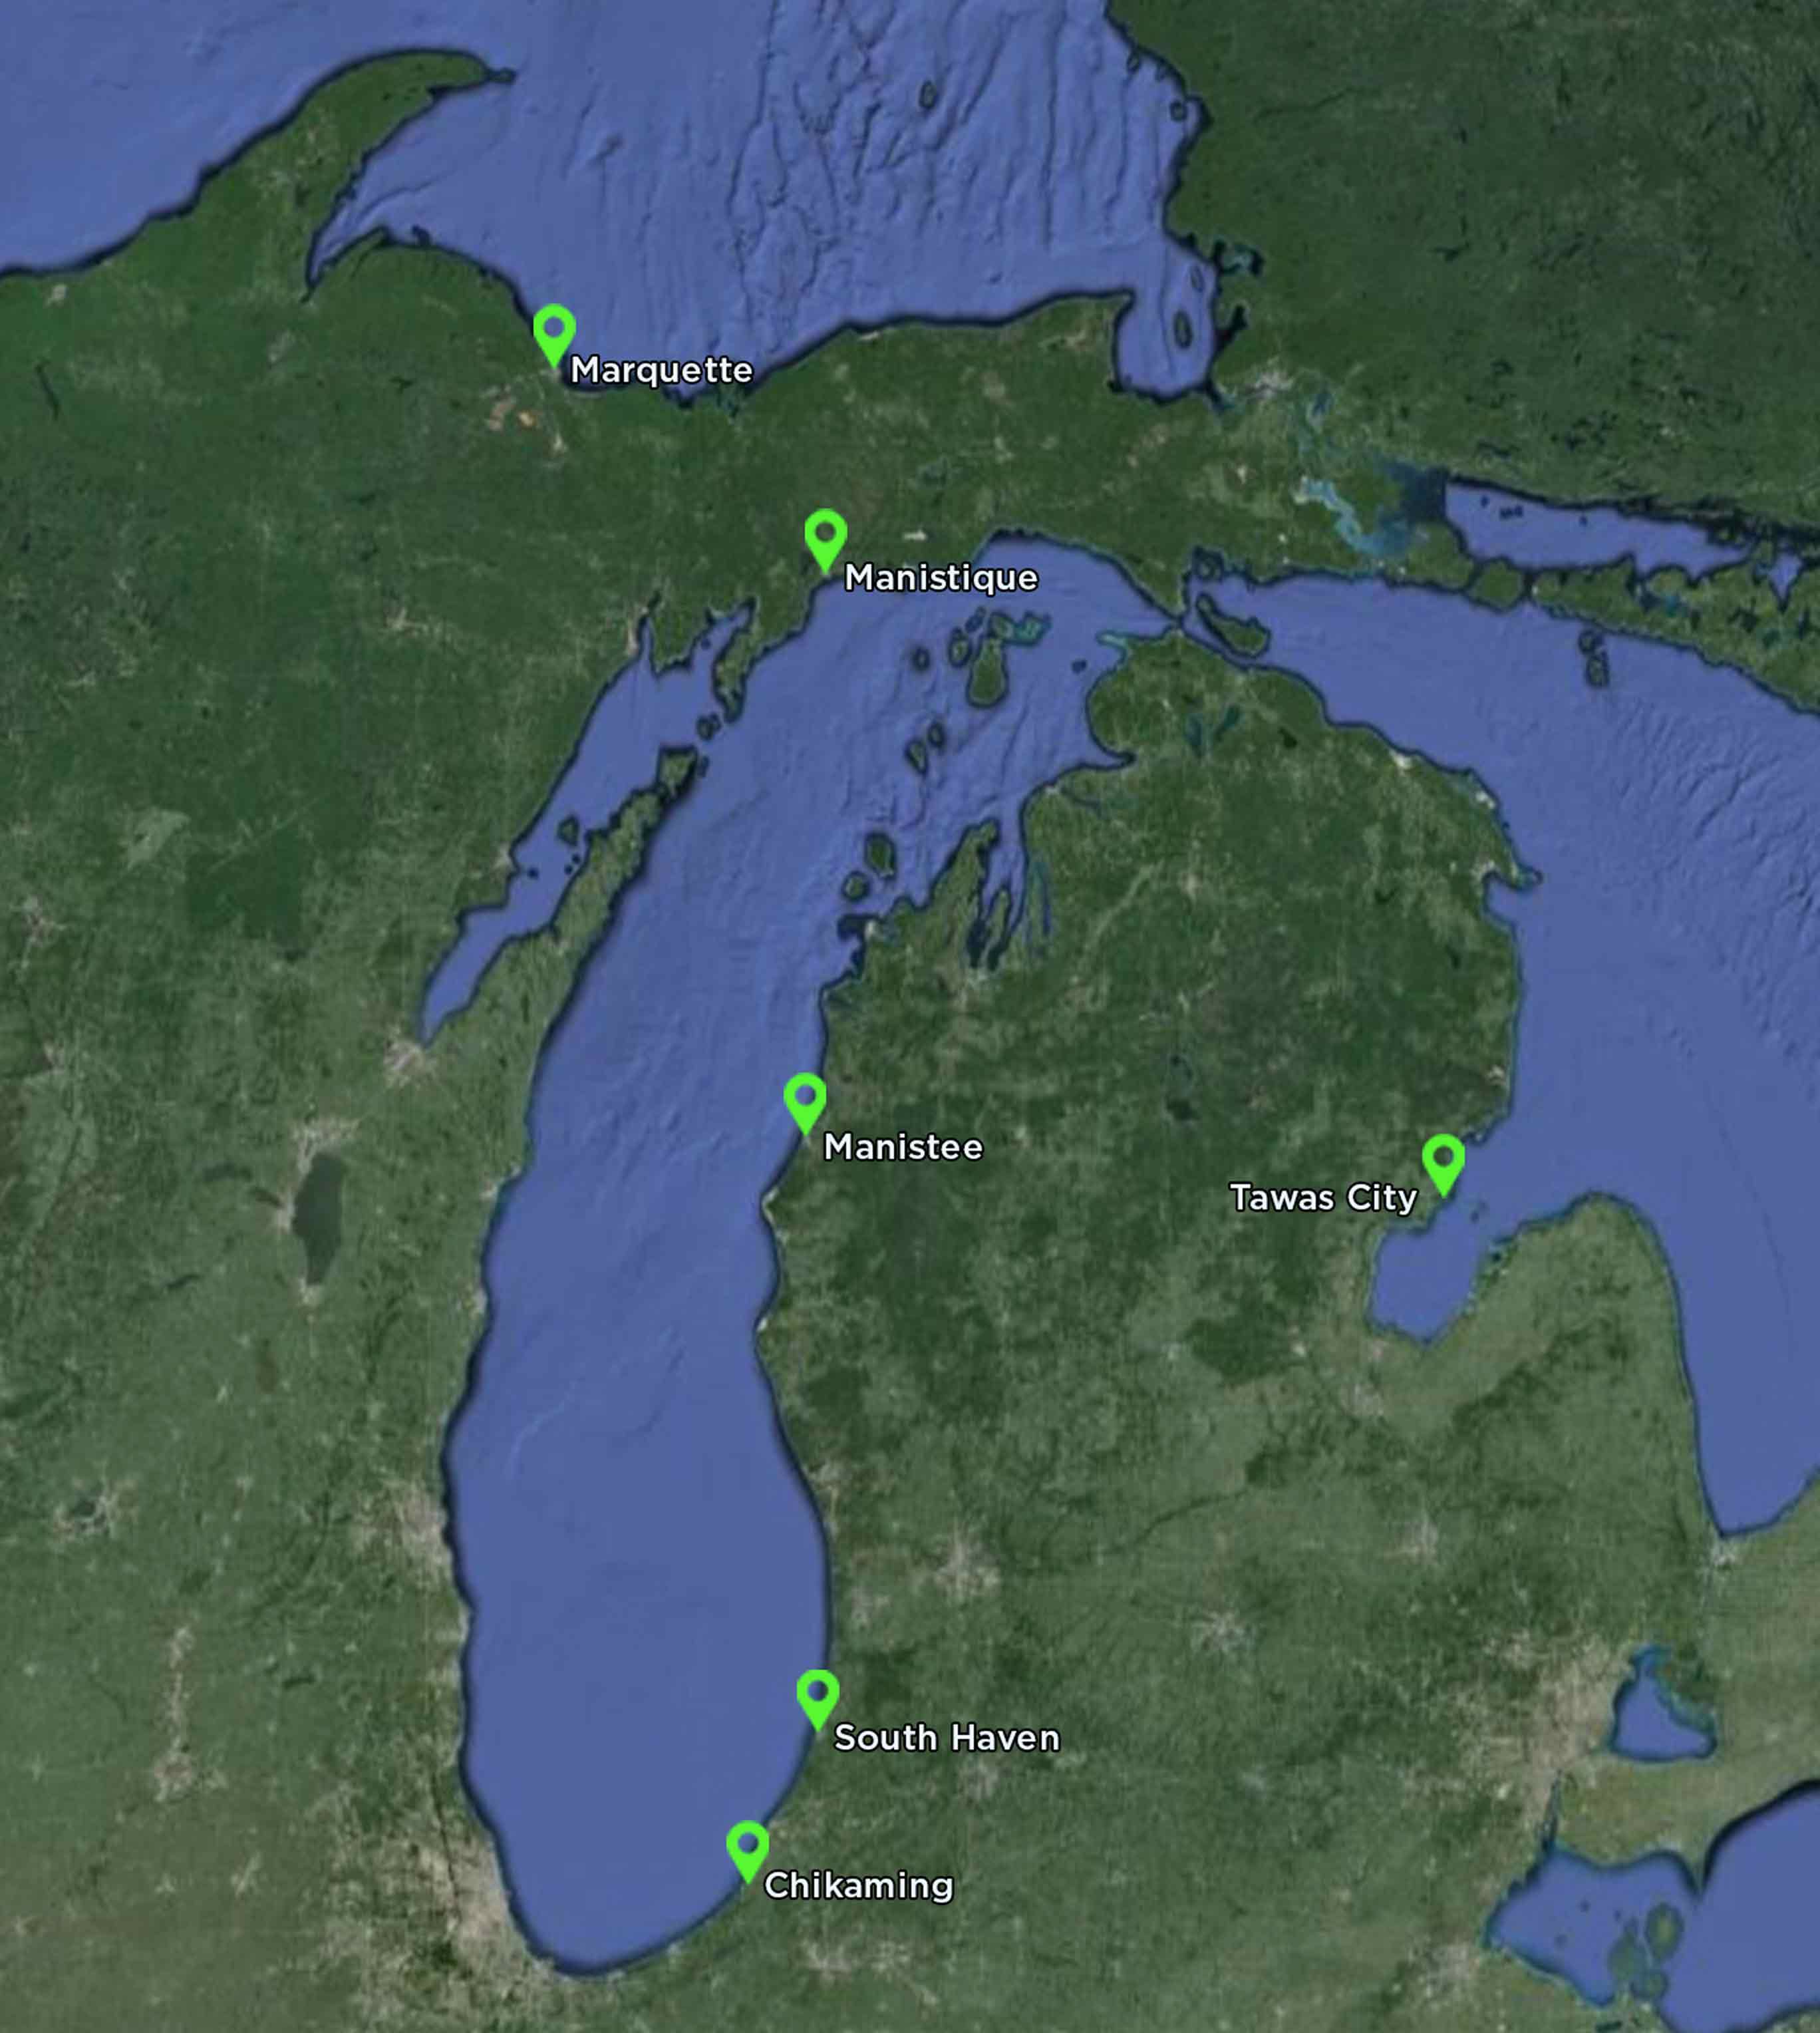 Satellite map showing various research locations along the Michigan lakeshore, marked with green pins, including Manistique, Manistee, South Haven, Chikaming, and Tawas City, representing key points of interest for water research studies in the Great Lakes region.